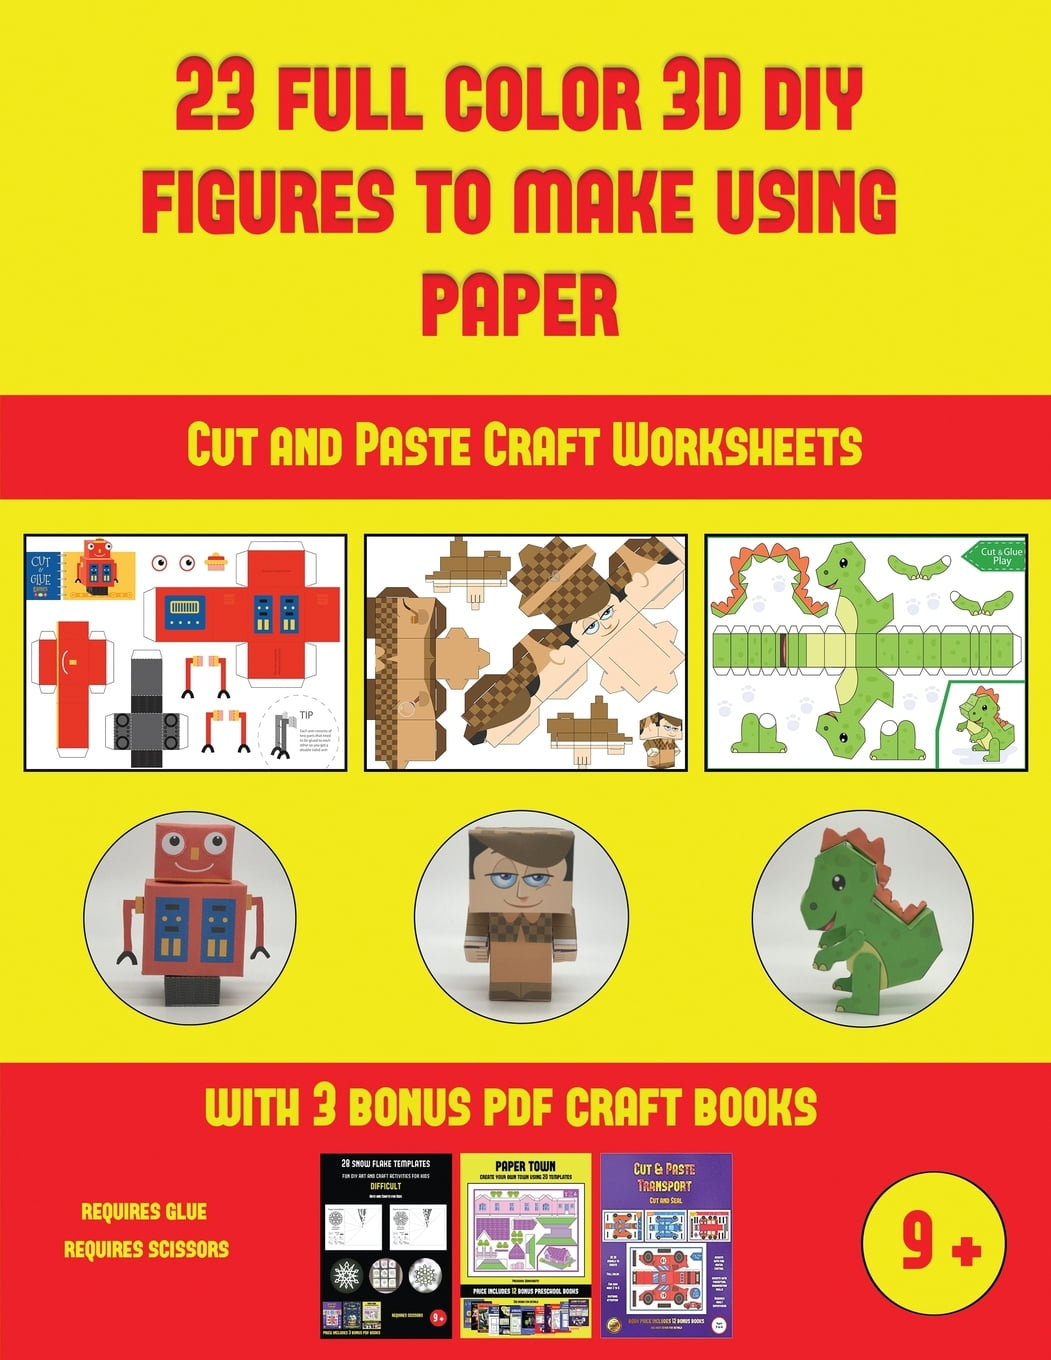 cut-and-paste-craft-worksheets-cut-and-paste-craft-worksheets-23-full